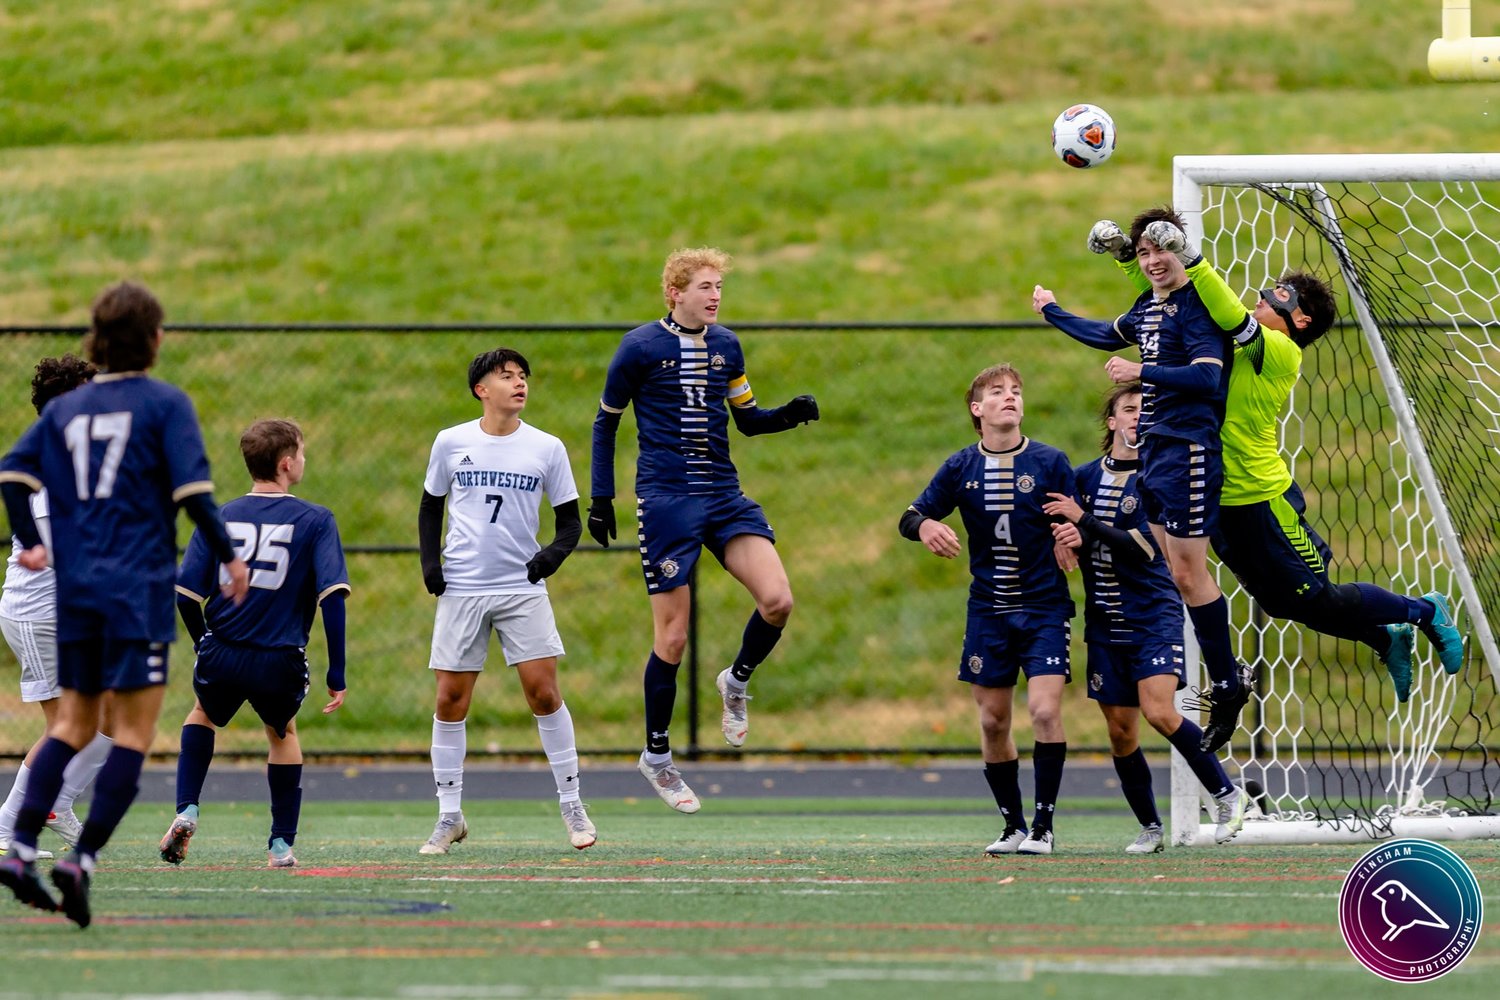 Severna Park lost 2-1 to Northwestern in the state semifinals November 13.